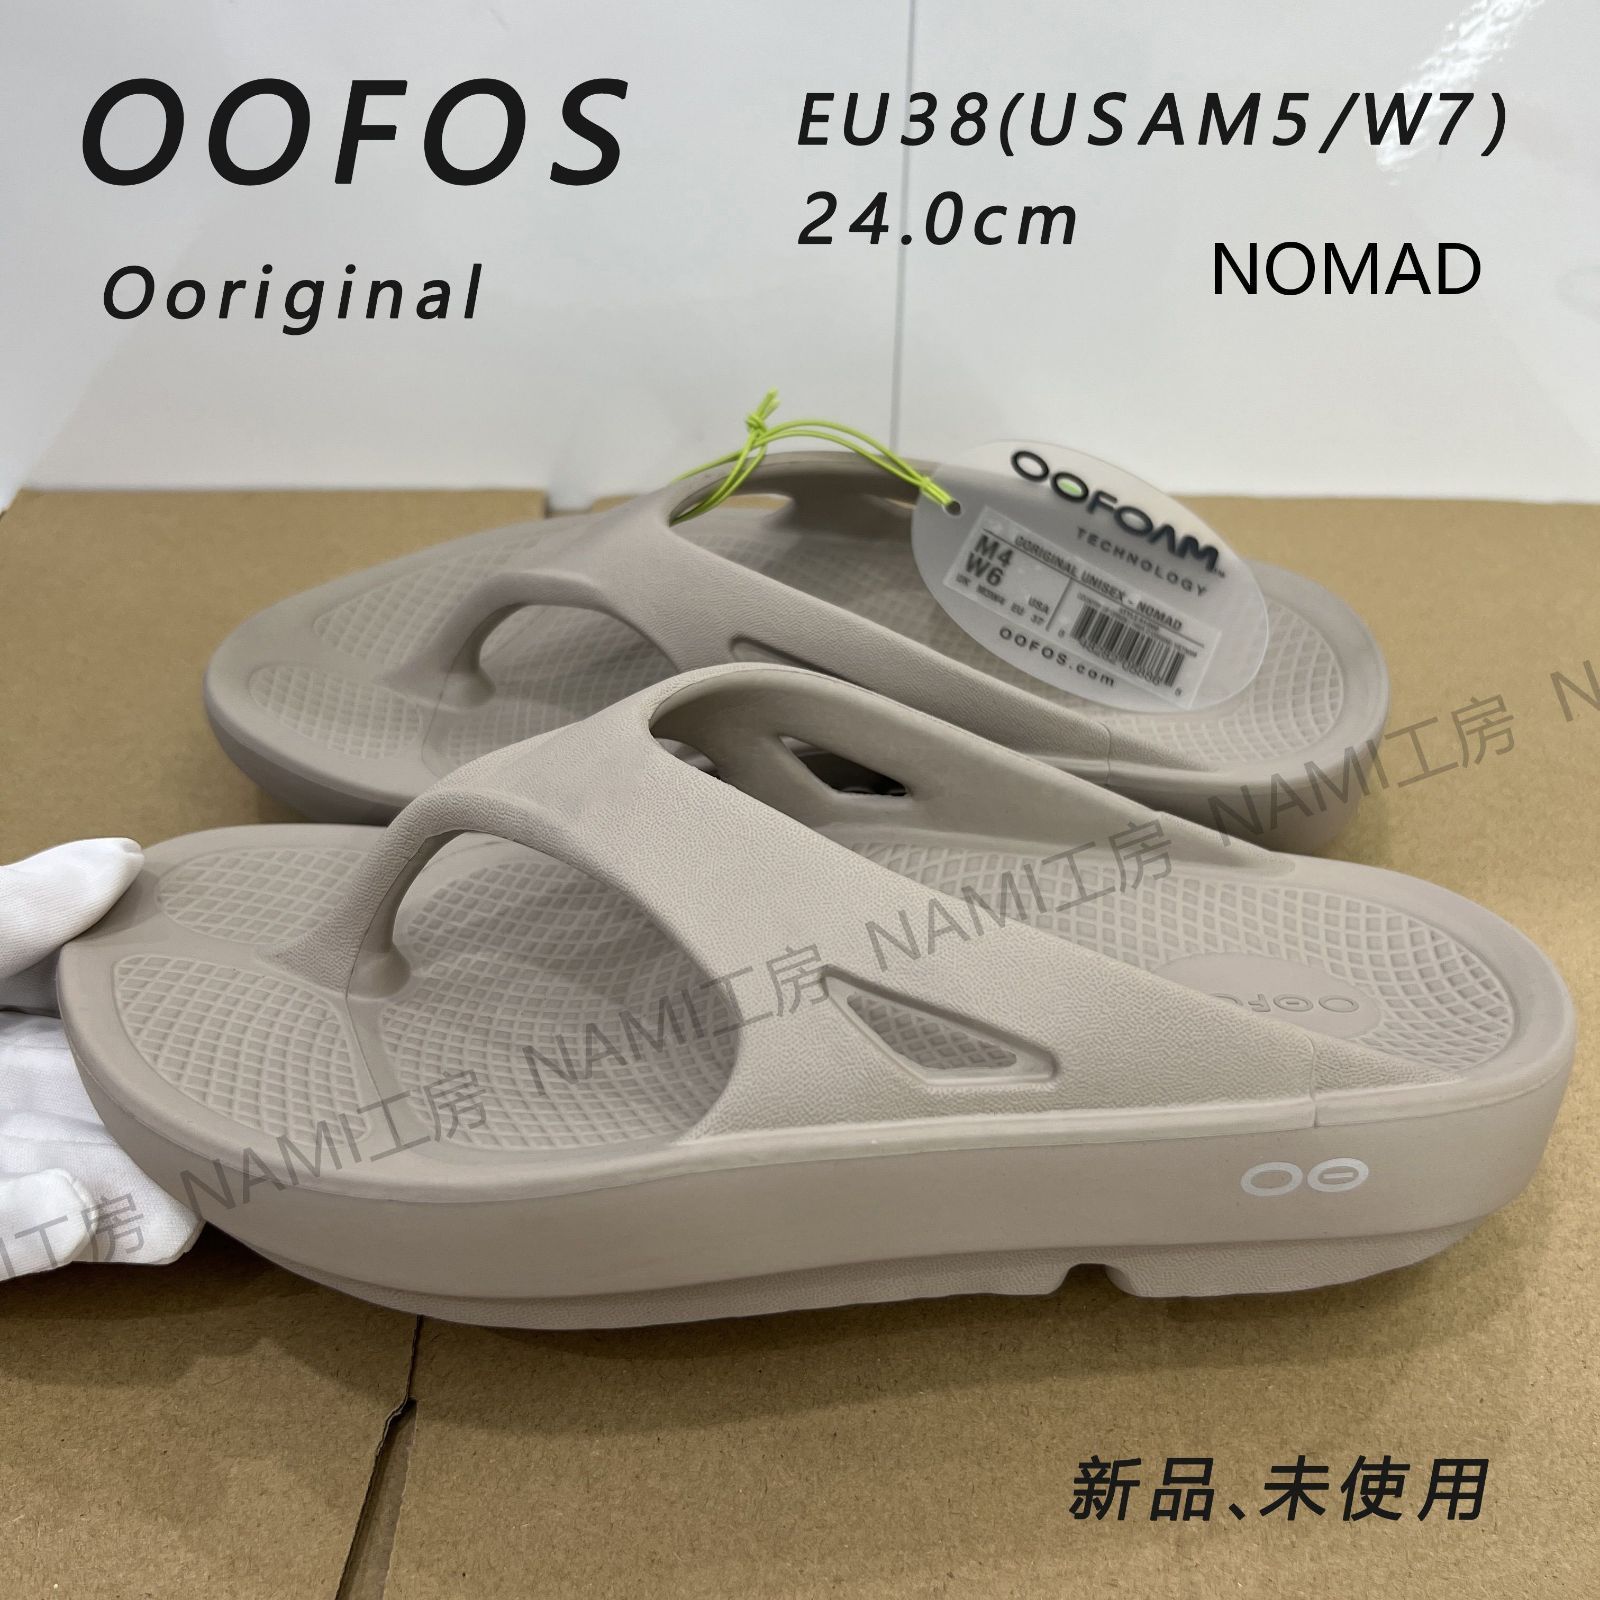 oofos nomad 24cm